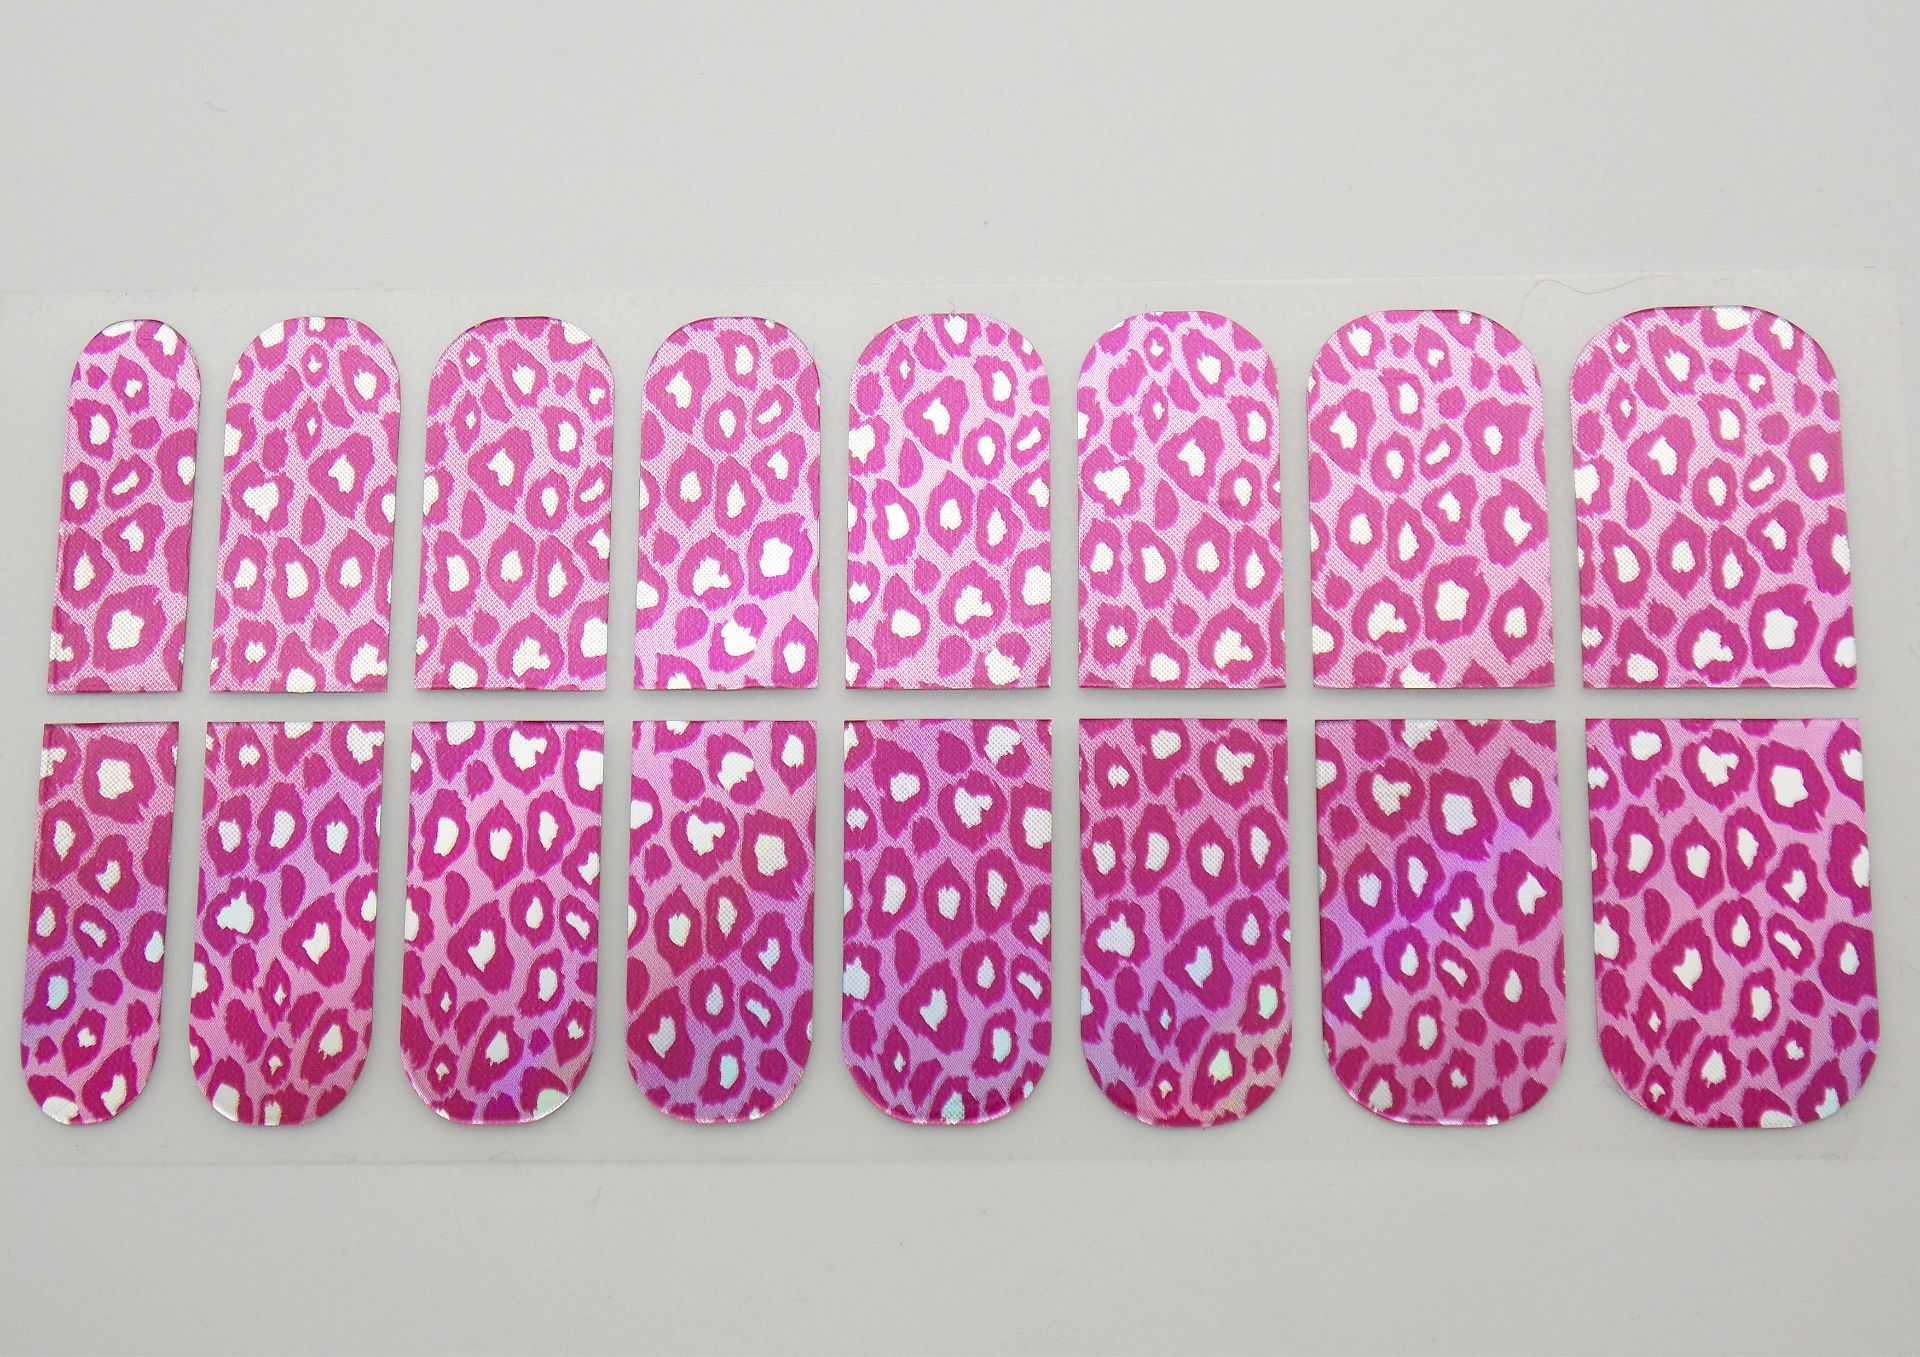 144 Packs Of Professional Nail Art Wrap Transfers - 3 Different Animal Print Styles - Image 6 of 9